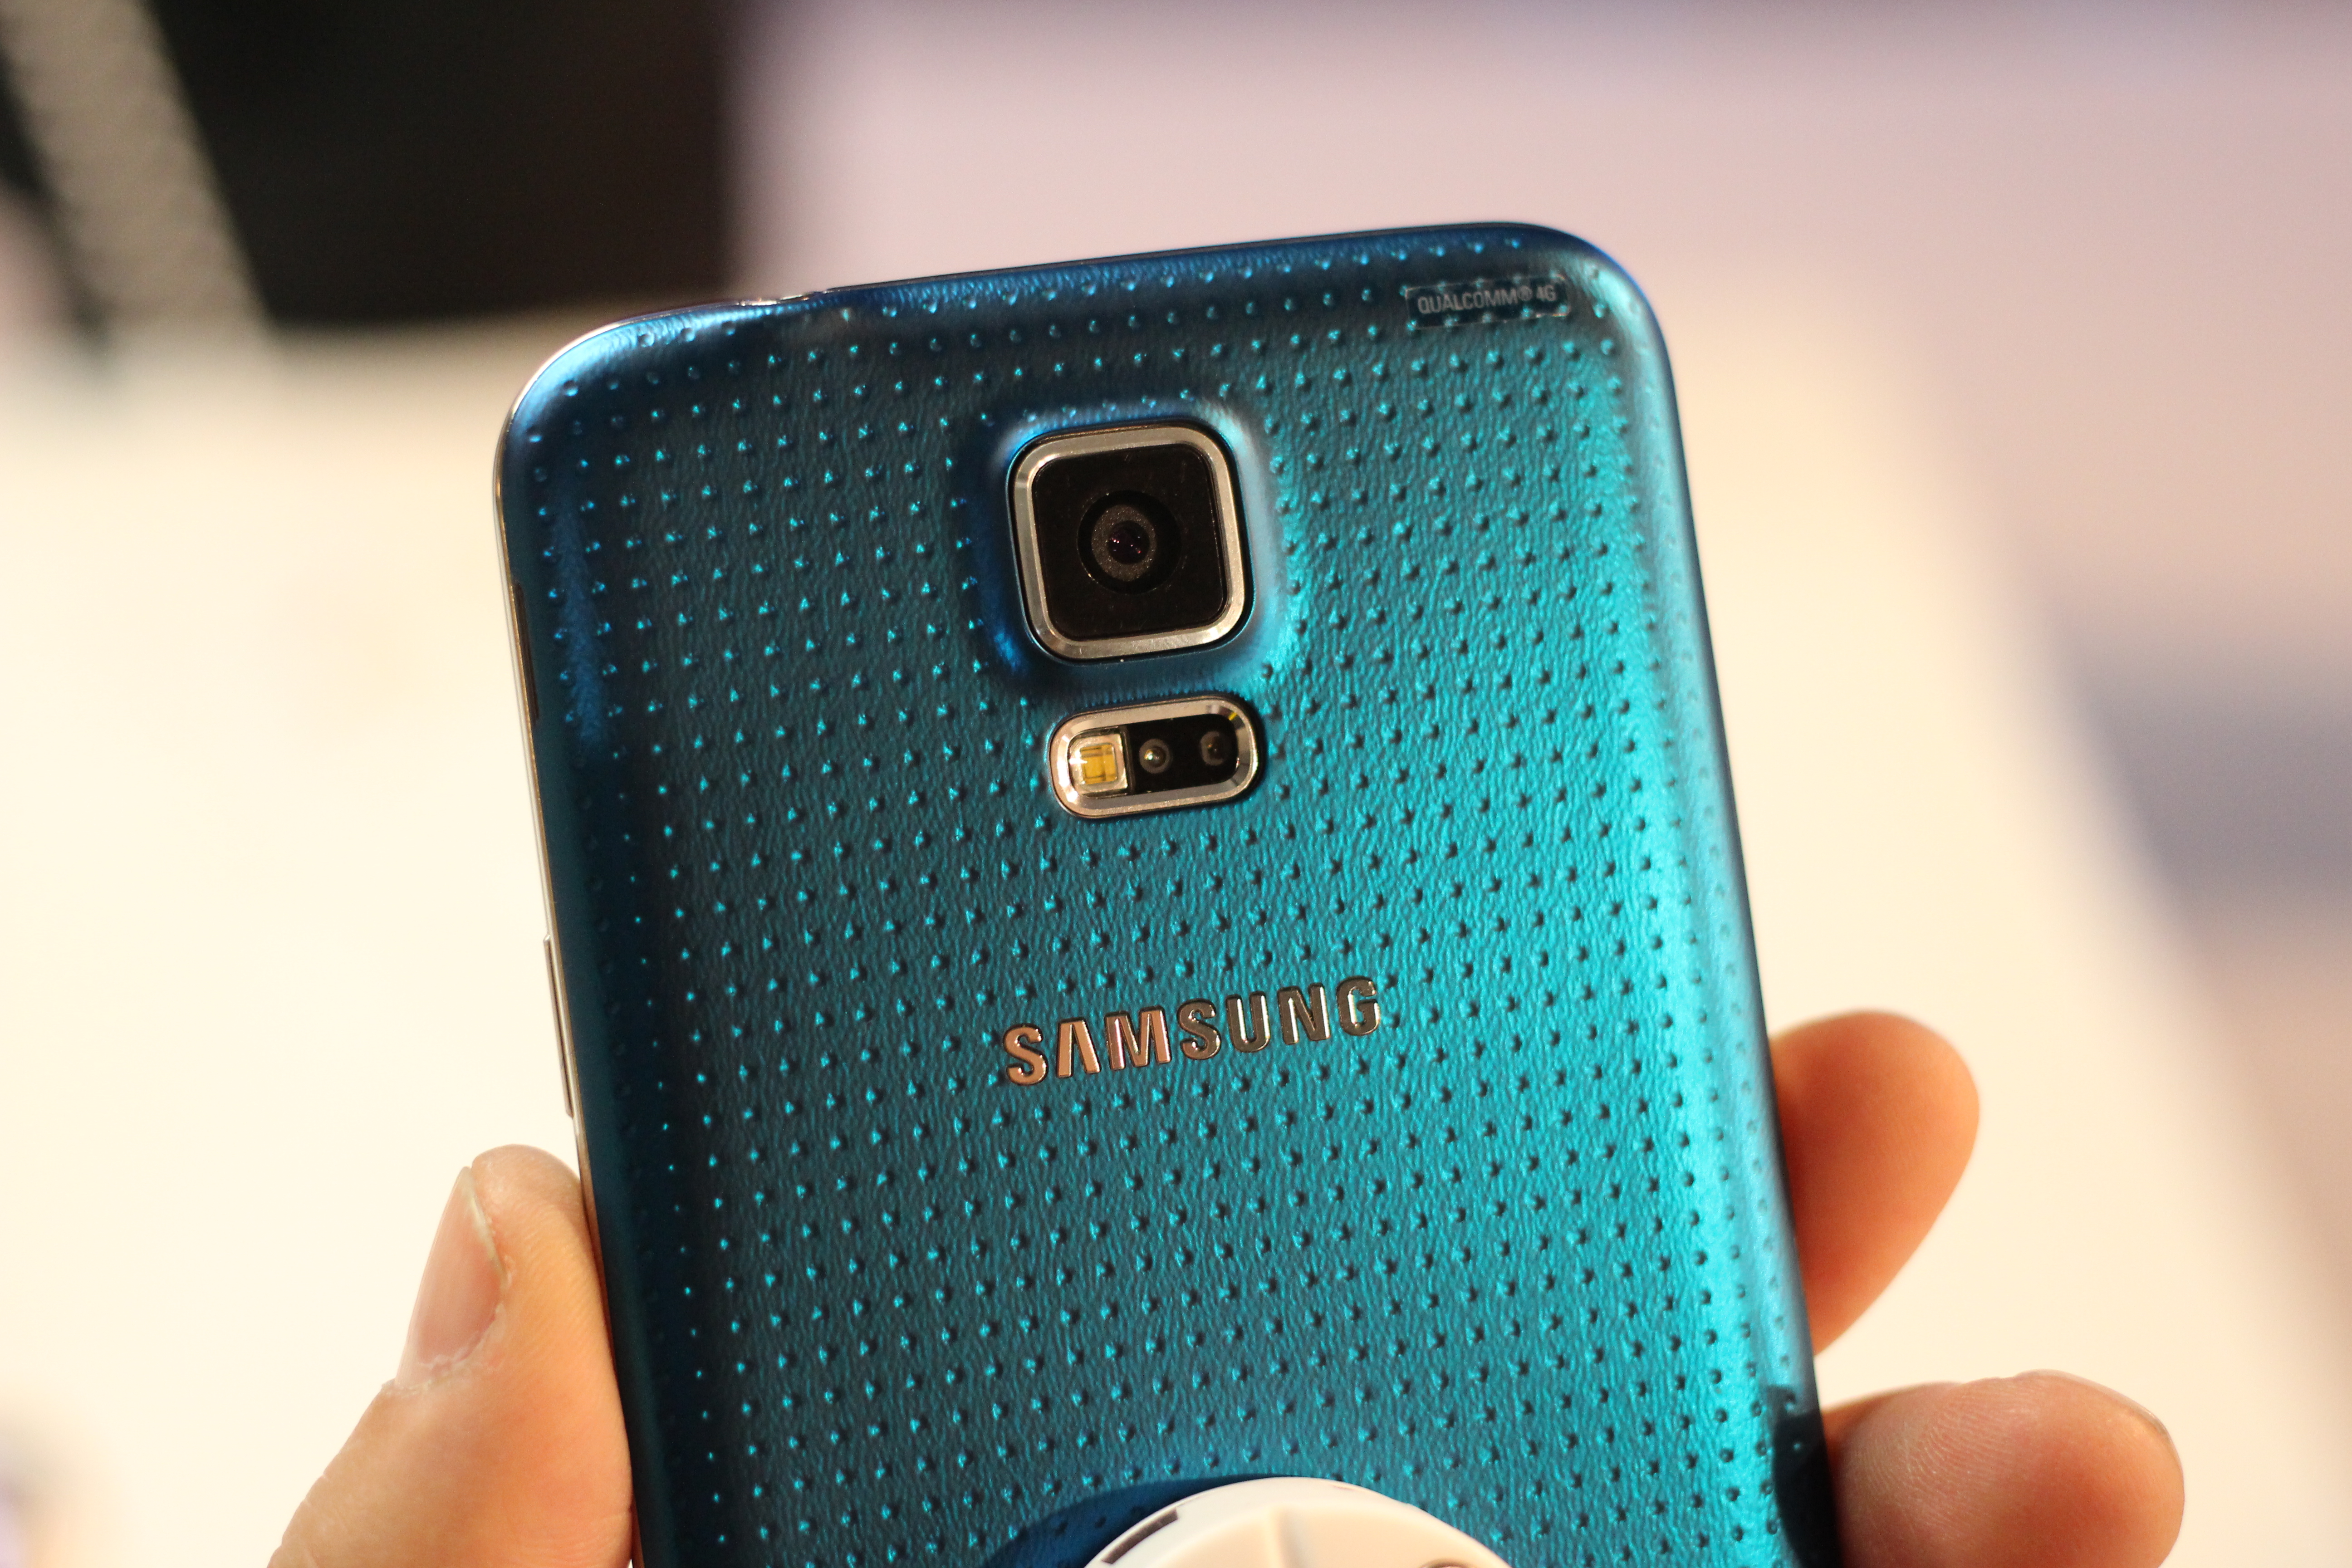 Marshmallow update for Samsung Galaxy S5 rolls out 1